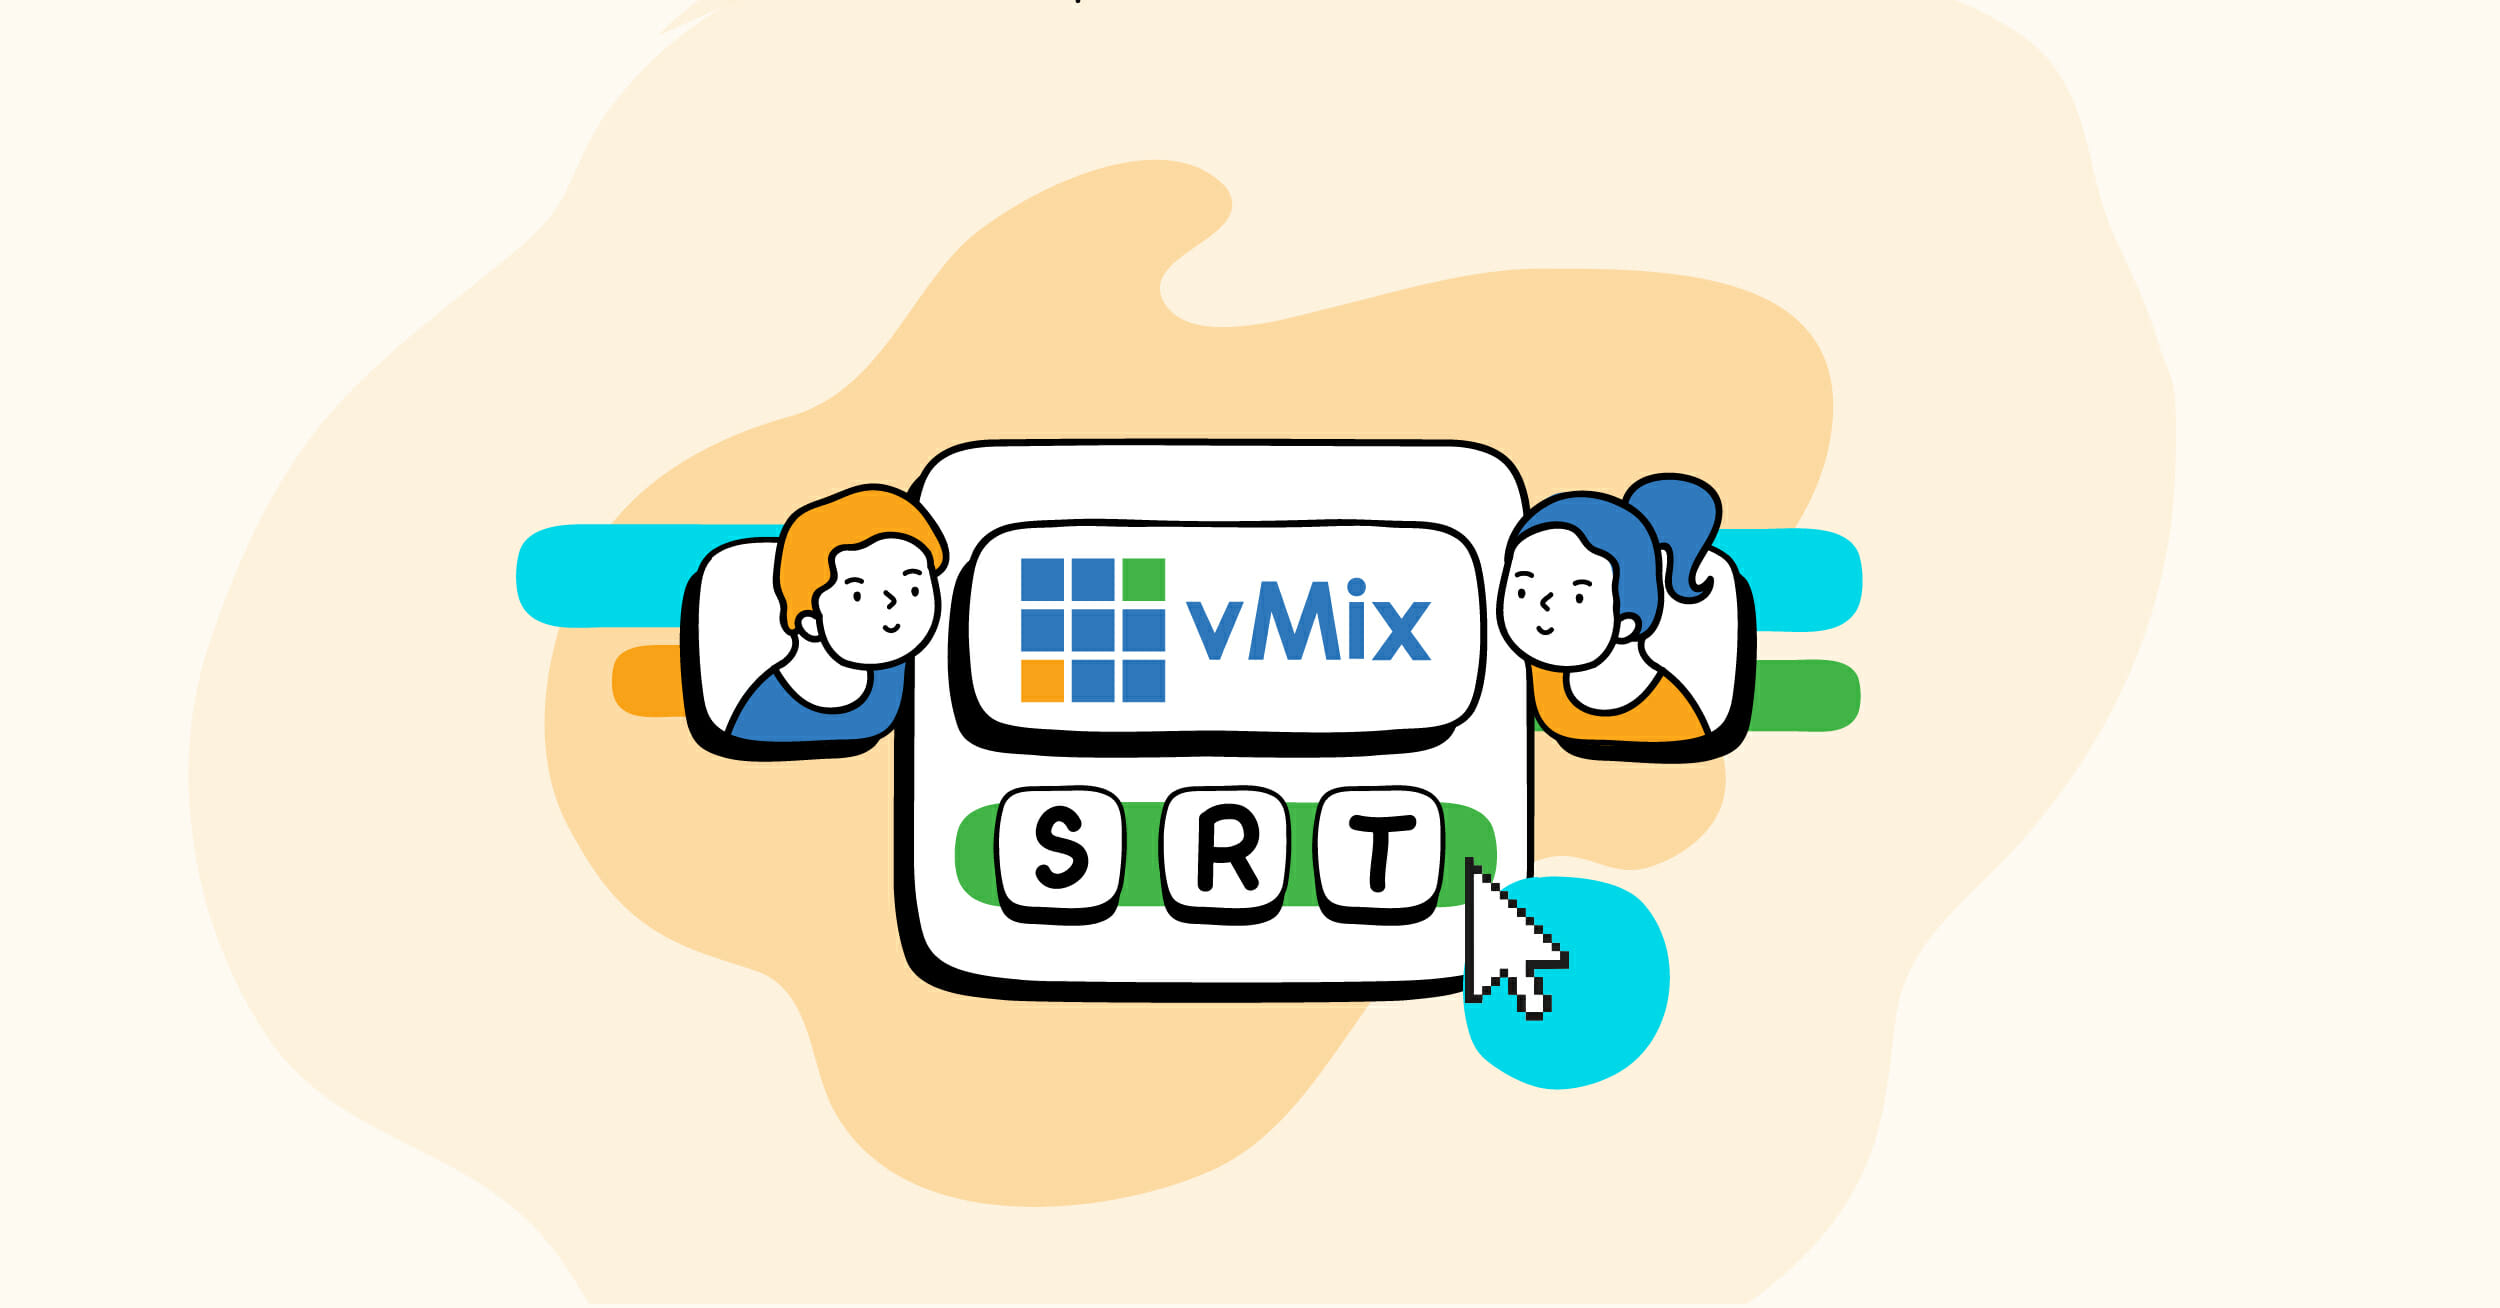 How to Set up SRT in Vmix and Stream to Castr